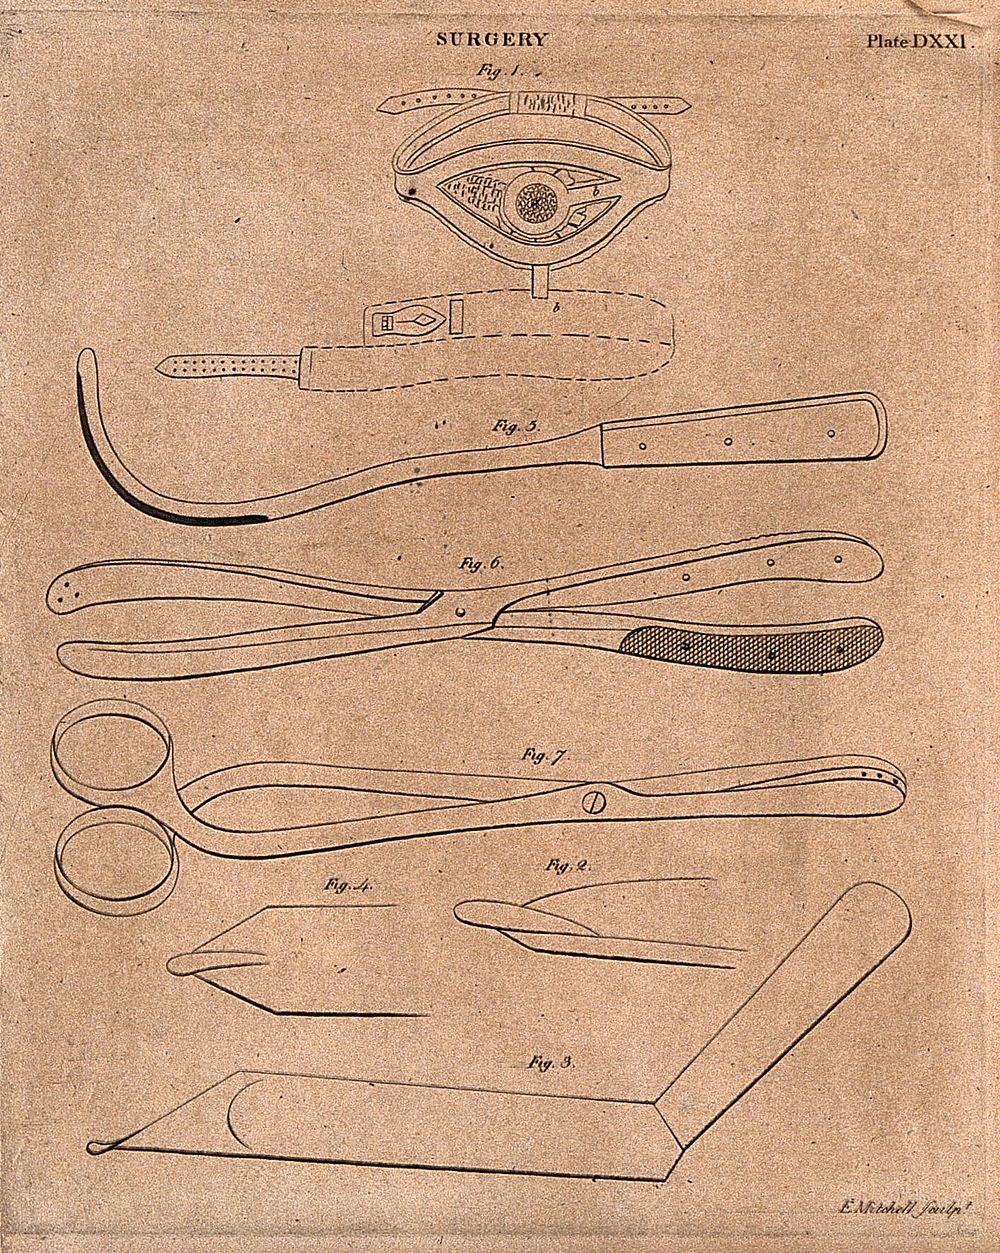 Surgical instruments for the treatment of hernias. Engraving by E. Mitchell.